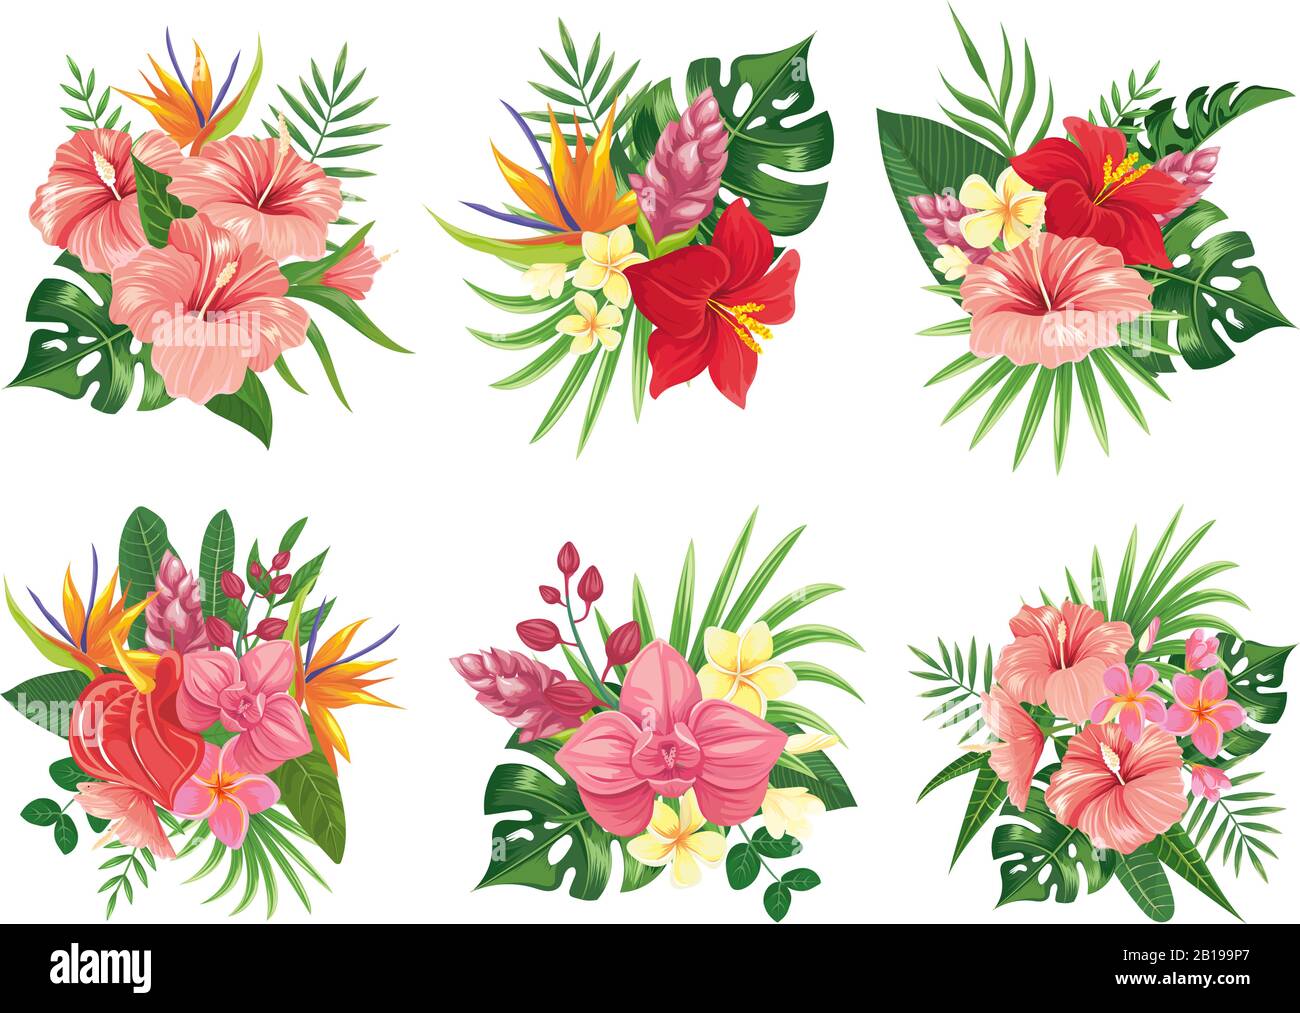 Tropical flowers bouquet. Exotic palm leaves, floral tropic bouquets and tropicals wedding invitation vector illustration set Stock Vector